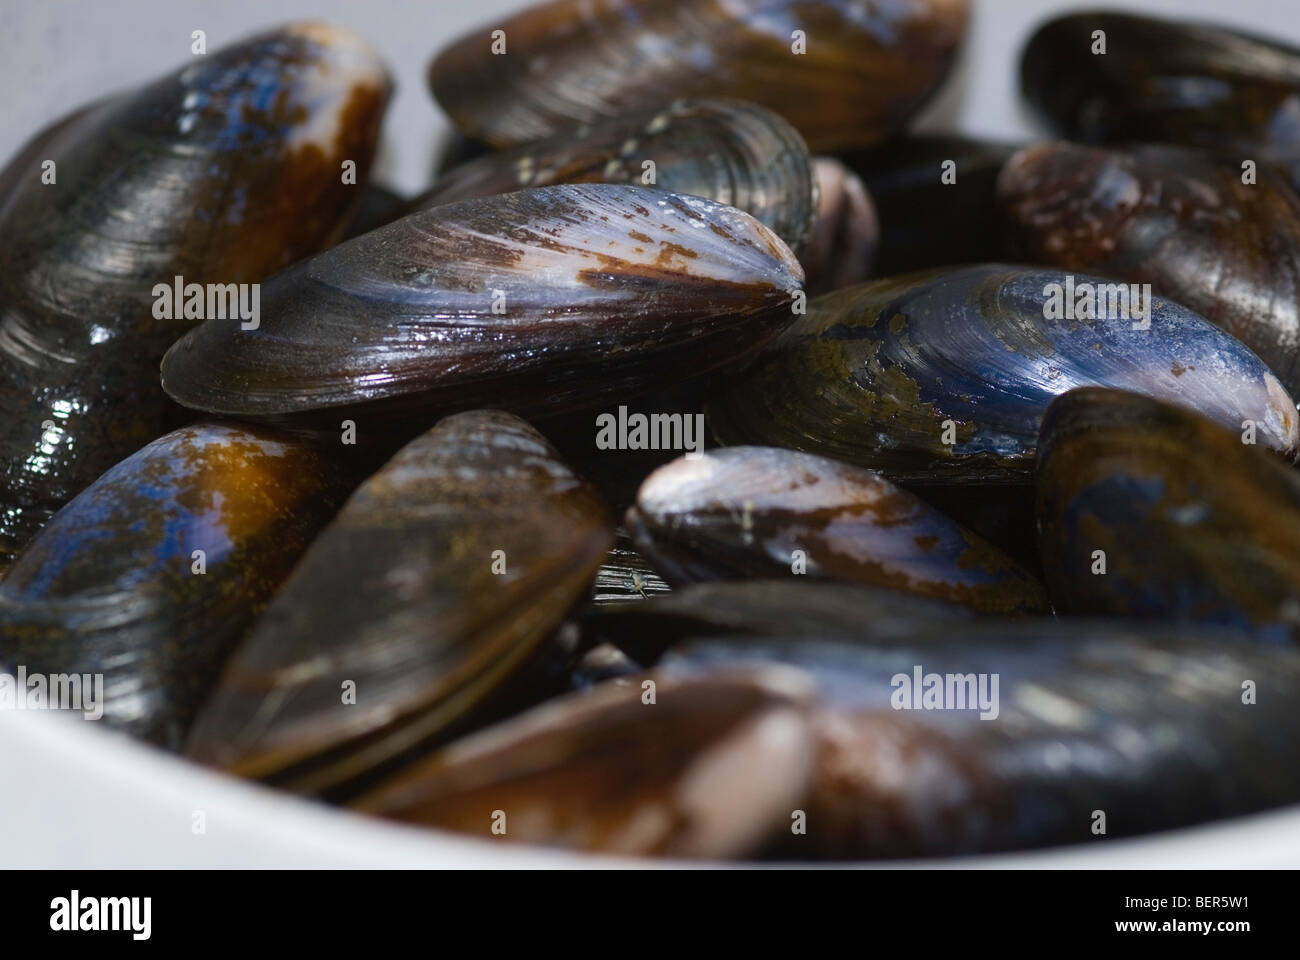 Mussels prepared ready for cooking Stock Photo